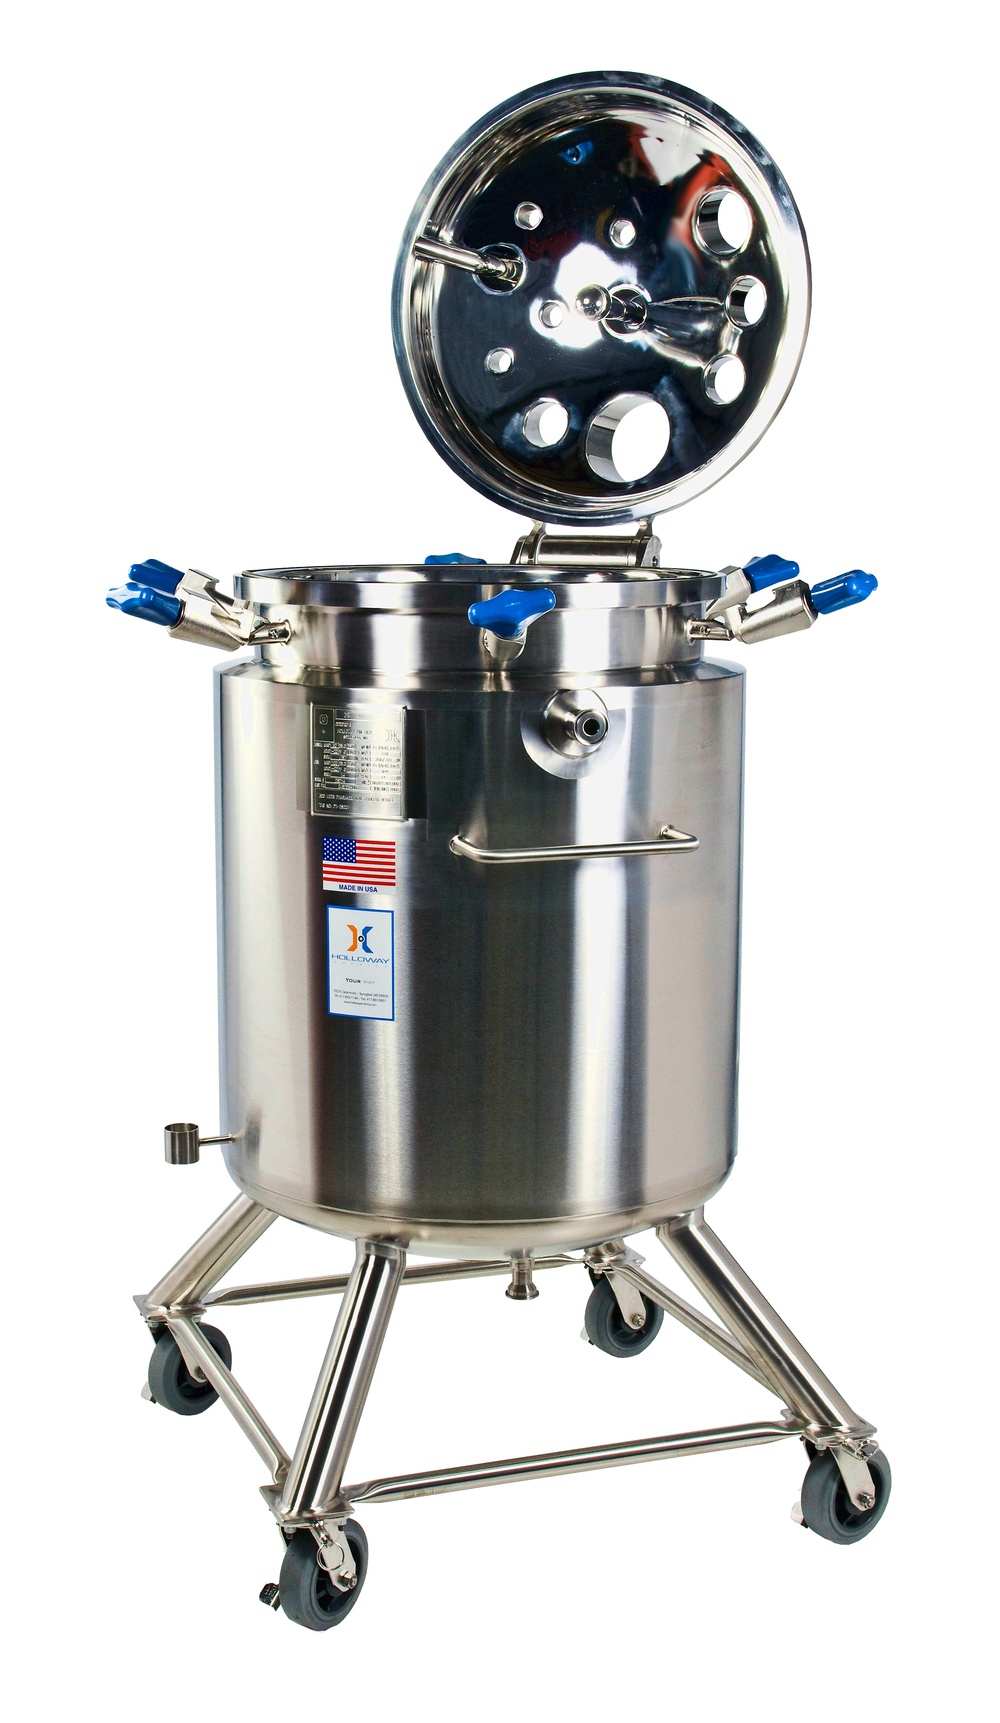 Another portable mix tank, this mixing vessel is built to spec.